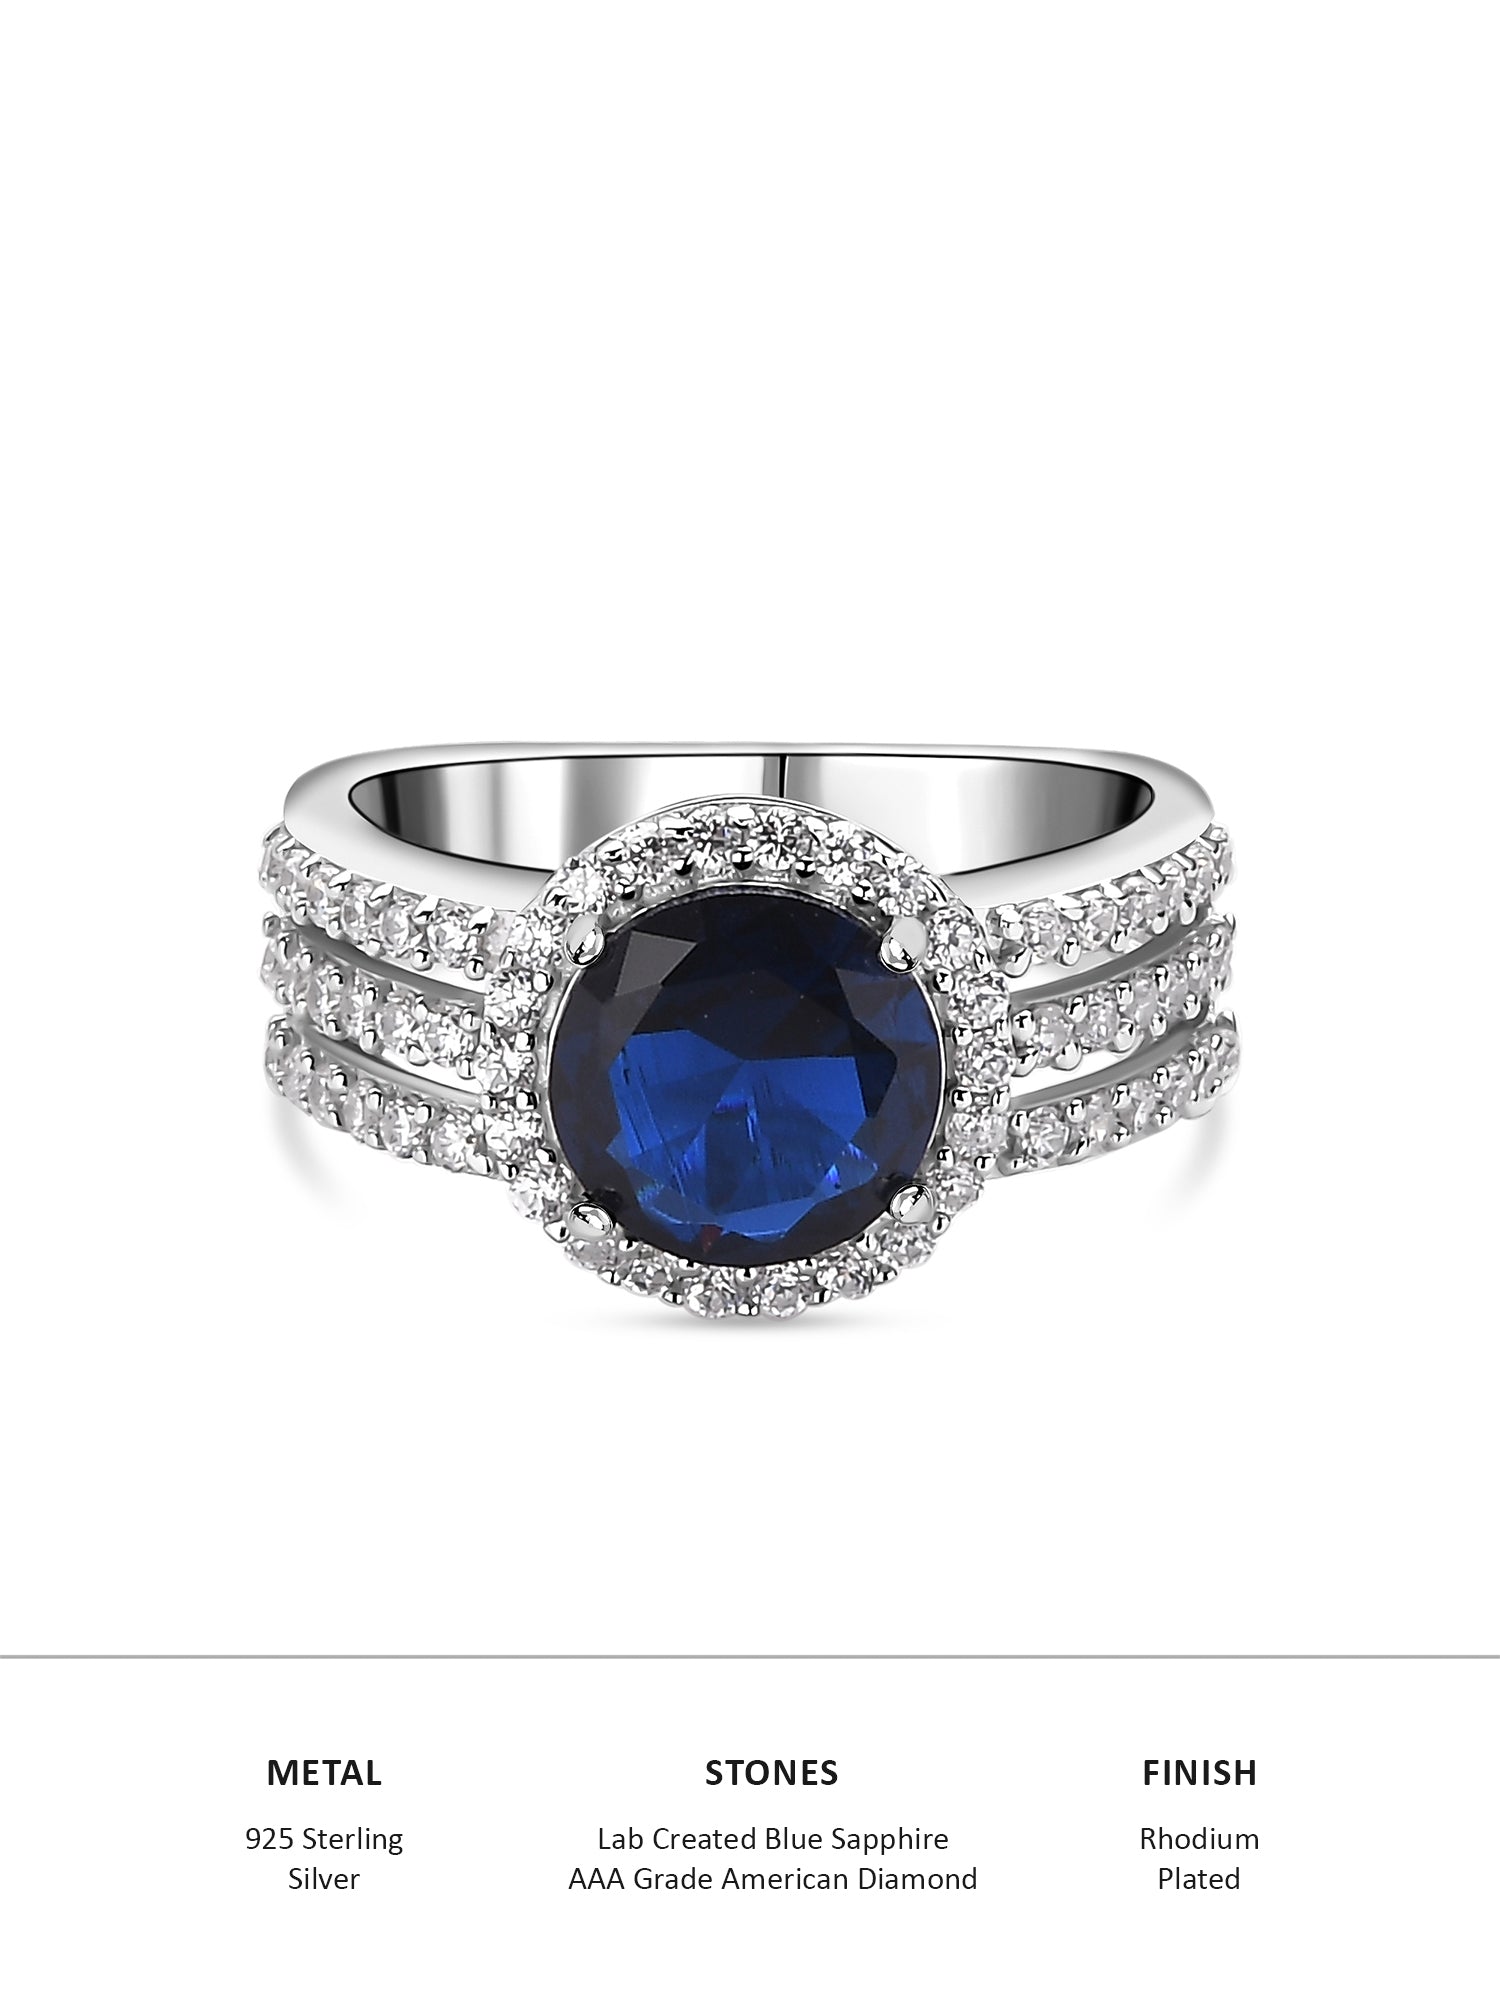 2 Carat Blue Sapphire Engagement Ring For Women In Silver-4